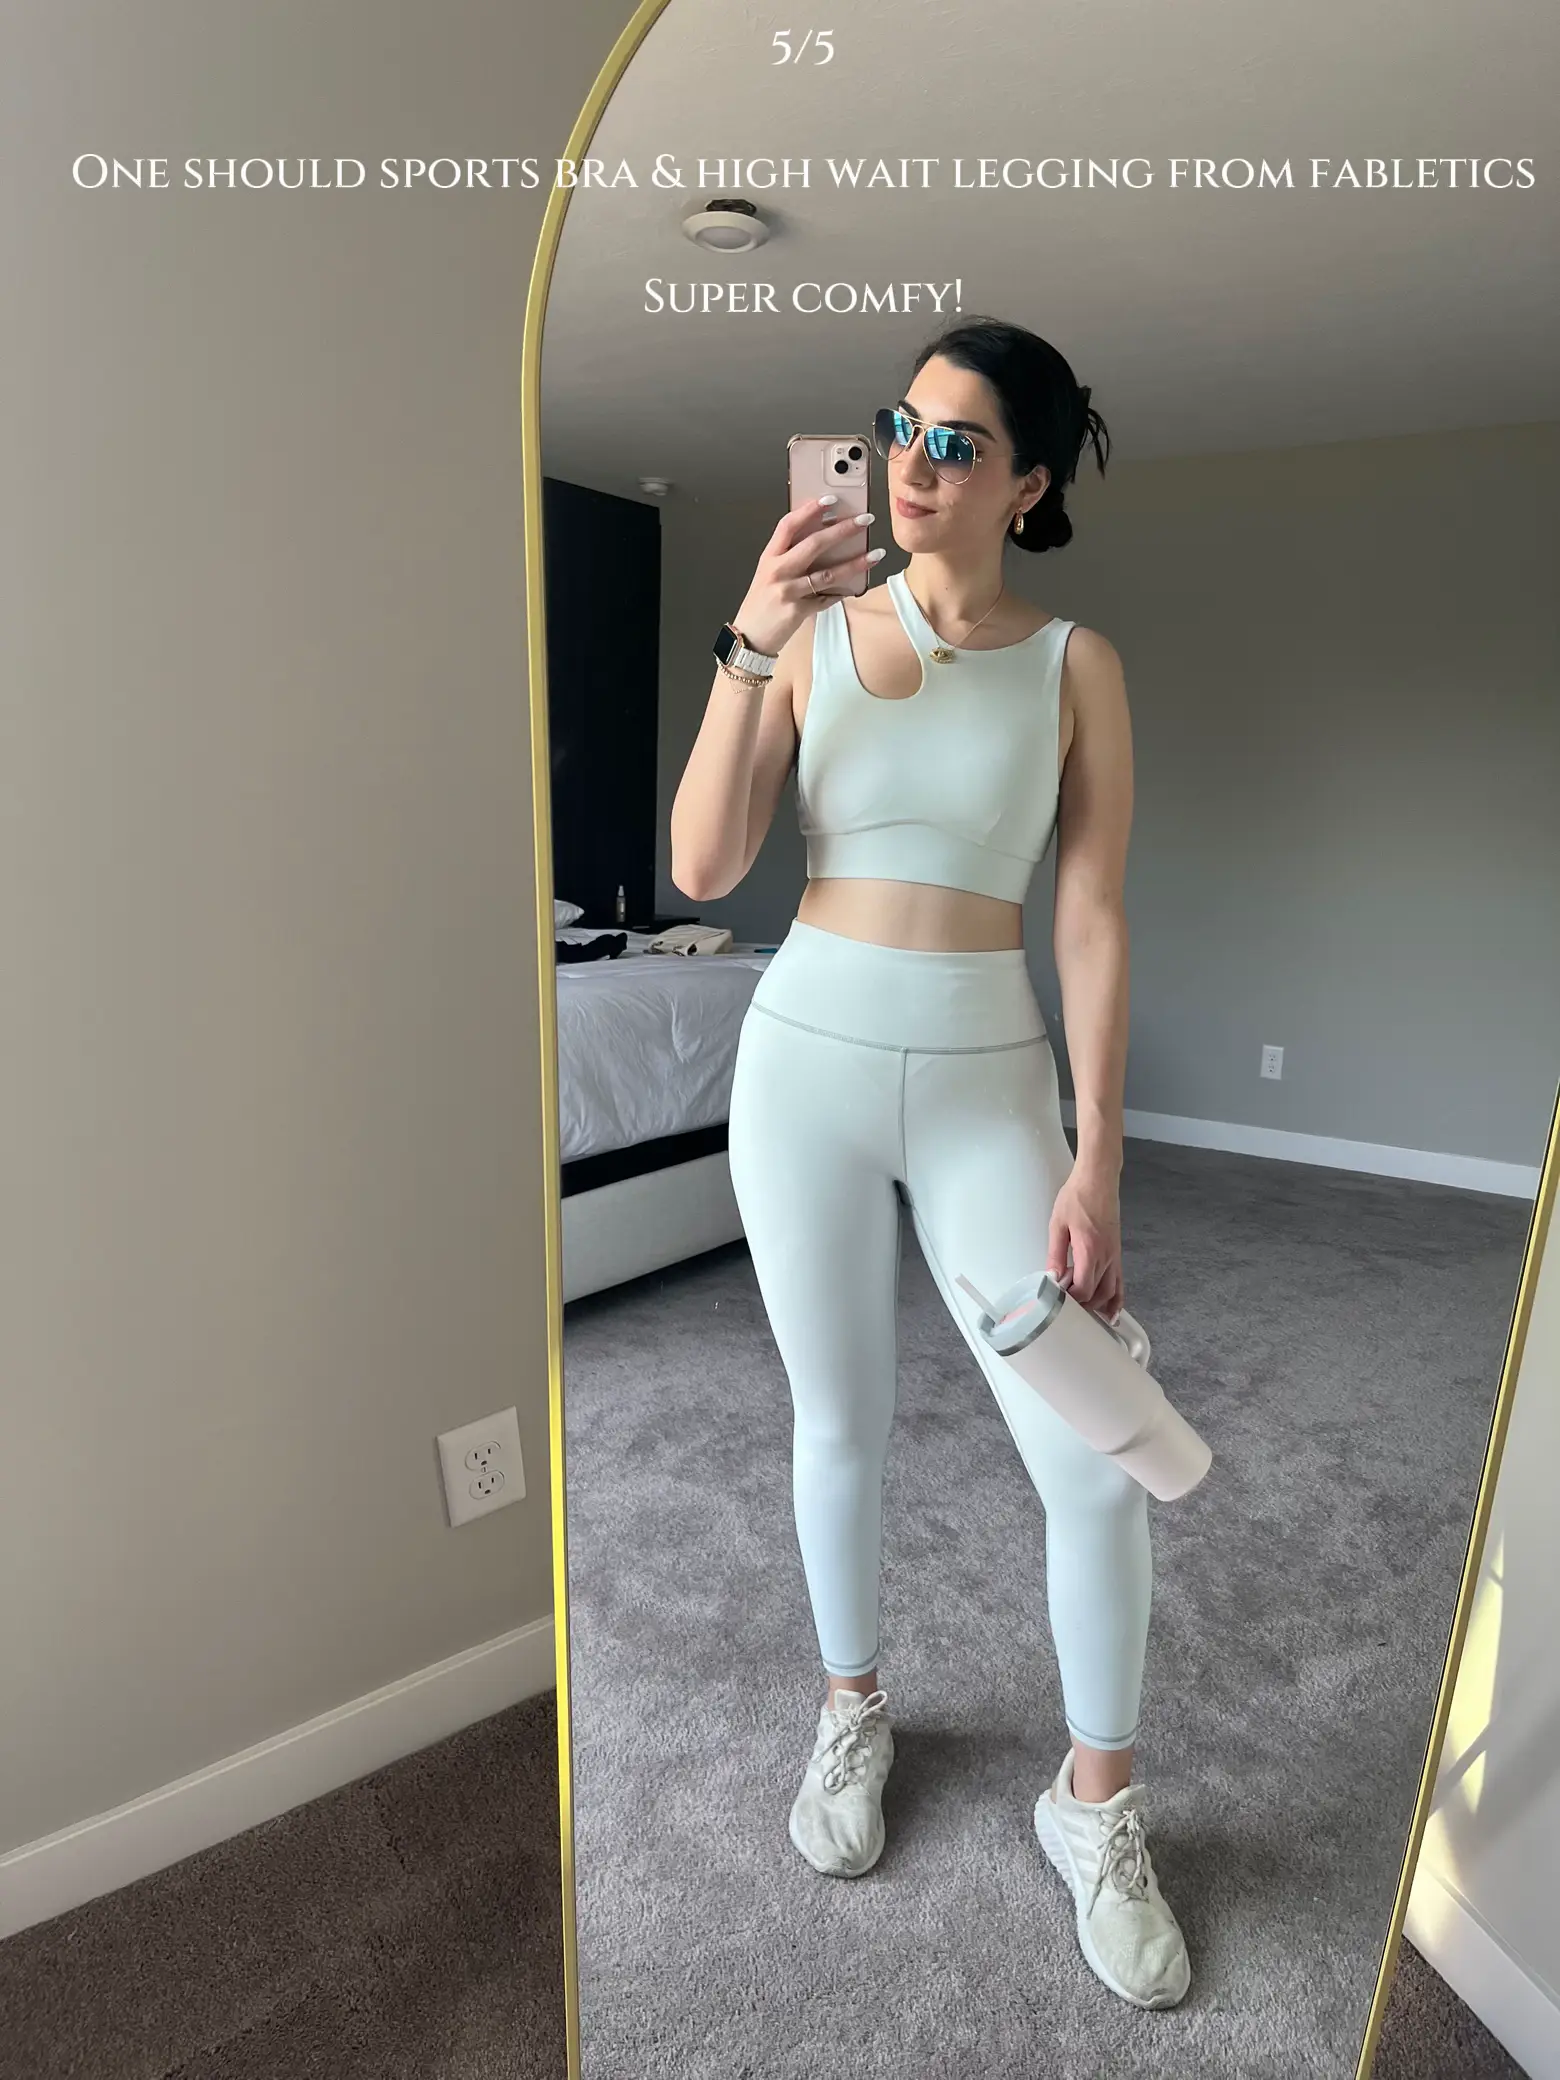 My outfits from fabletics & ratings, Gallery posted by DanielleHabash